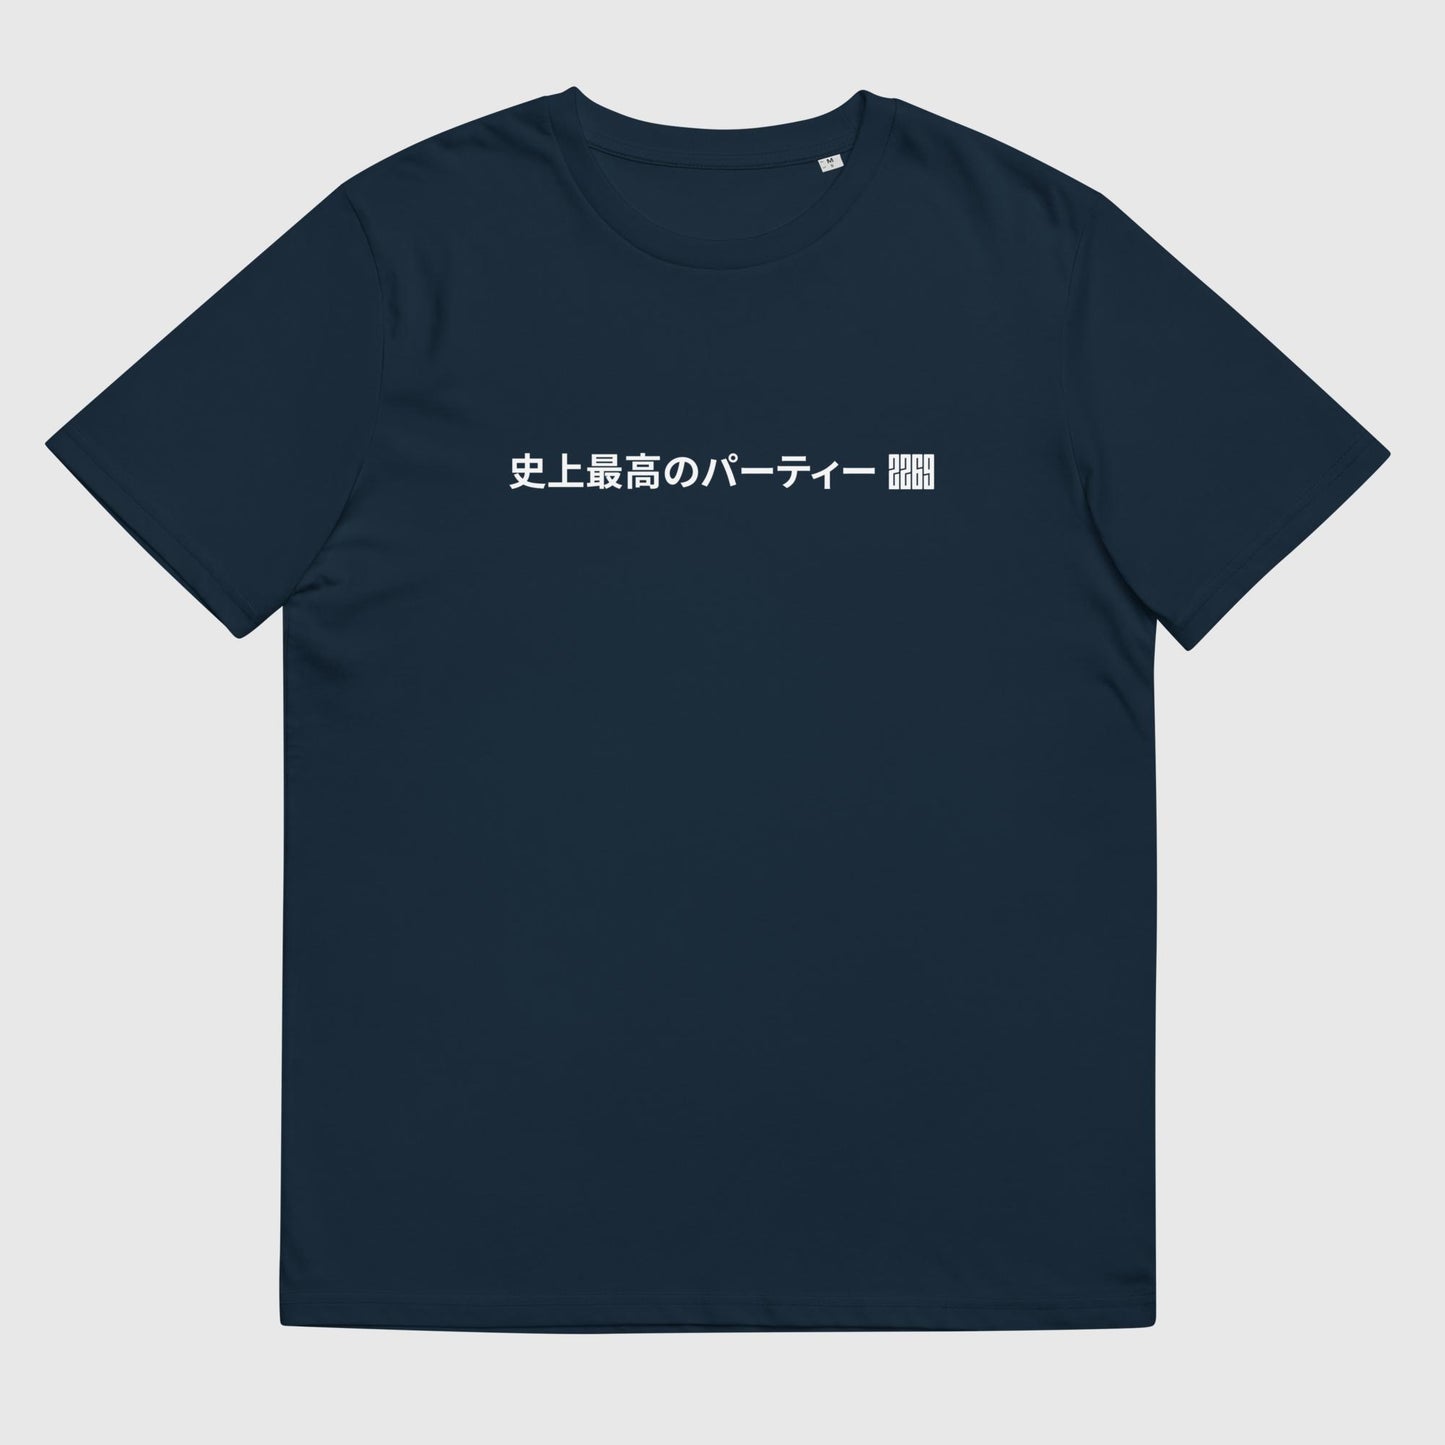 Men's navy organic cotton t-shirt with Japanese 2269 party message